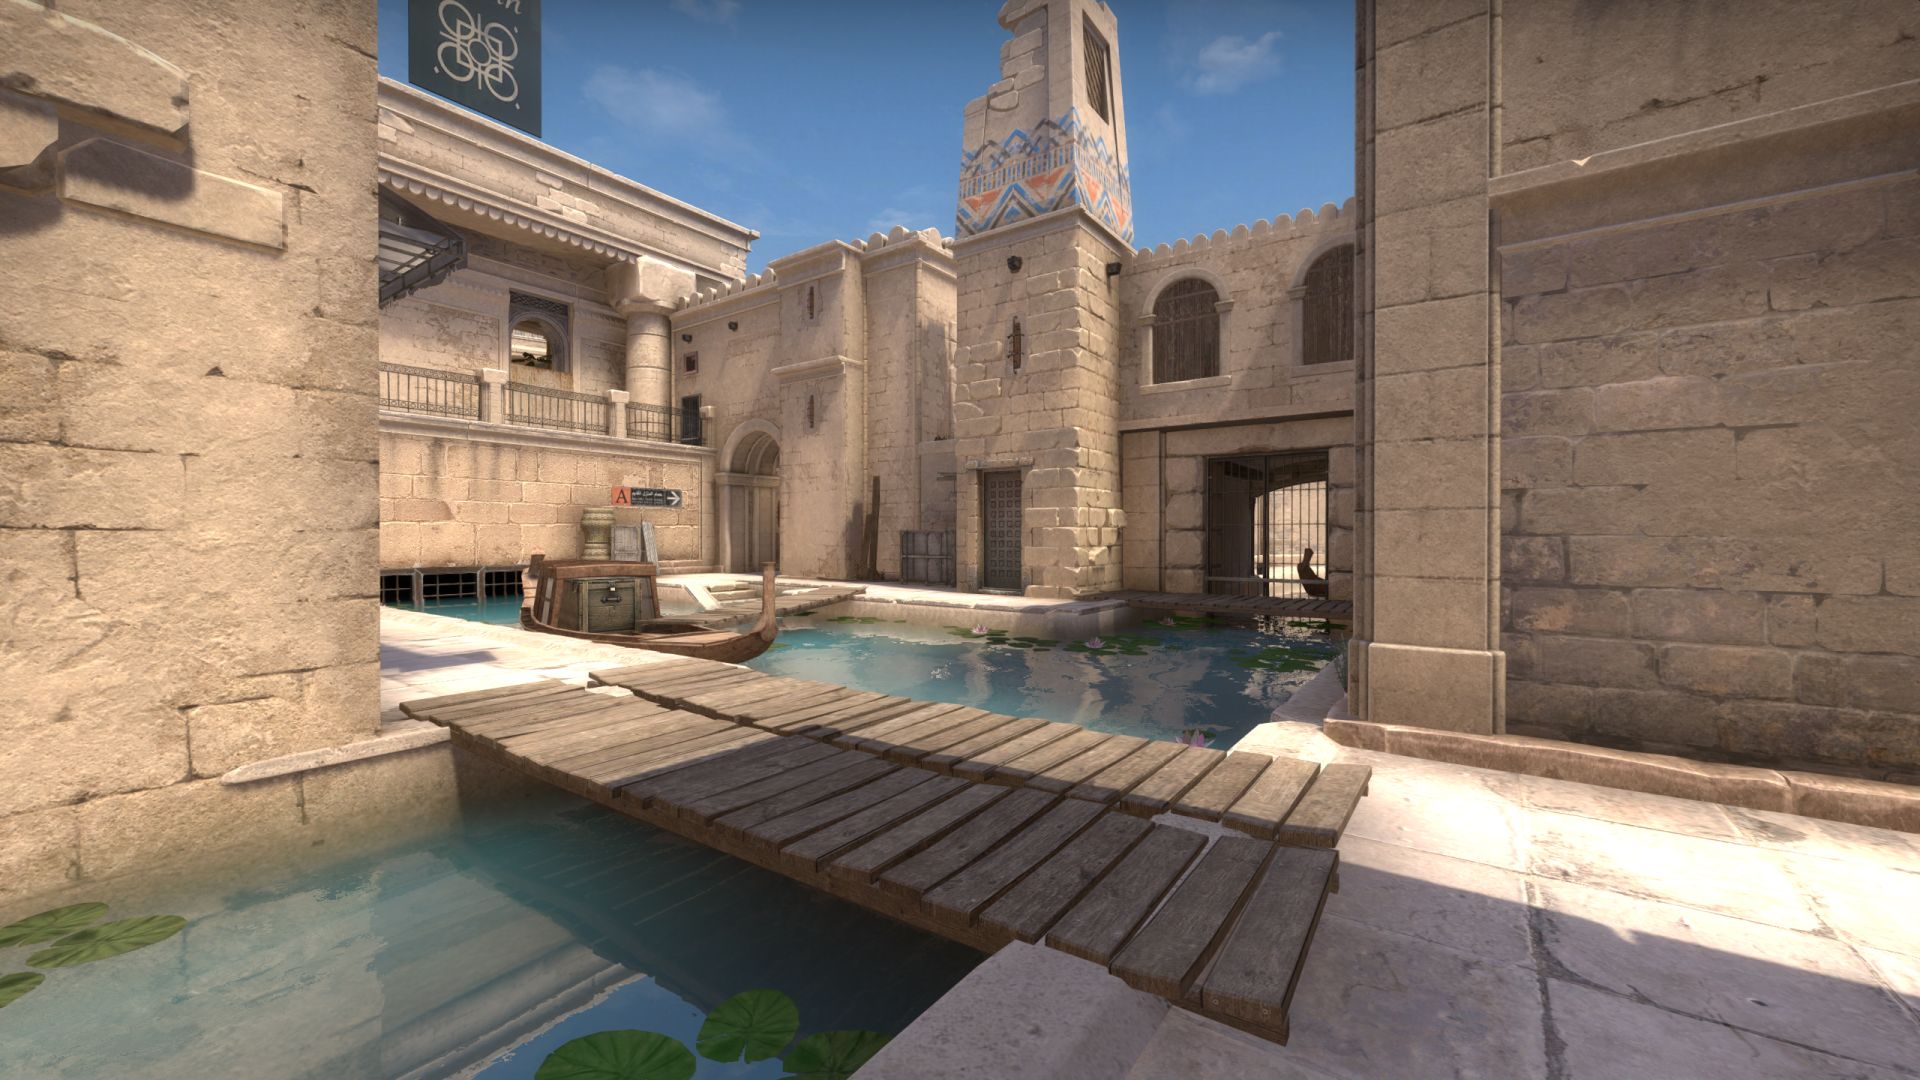 Cs Go Update Brings A Batch Of Changes To Anubis And Mutiny Maps Pcgamesn